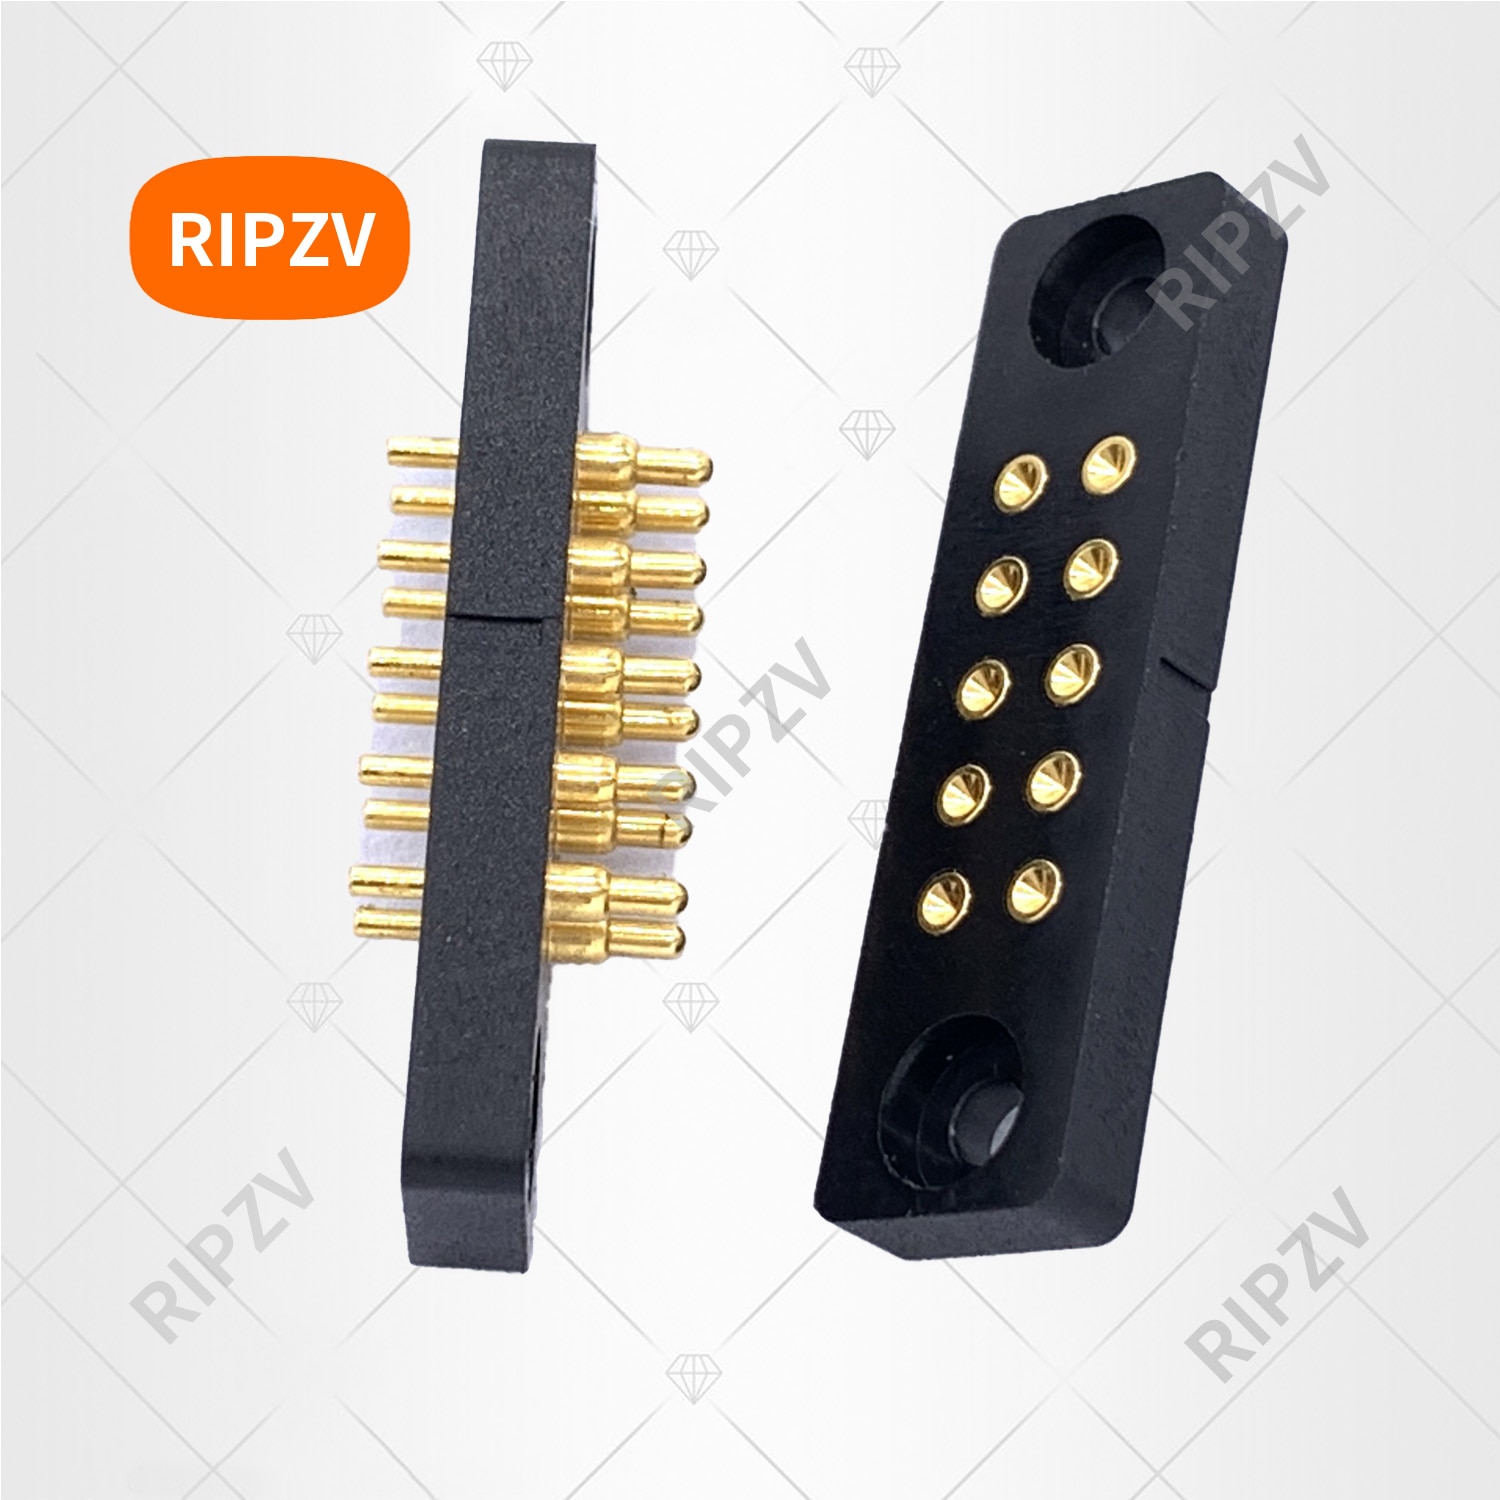 1 set male + female pitch 3mm 1.2A probe connector spring thimble charging spring needle conductive 10P pogo pin 10pin RIPZV